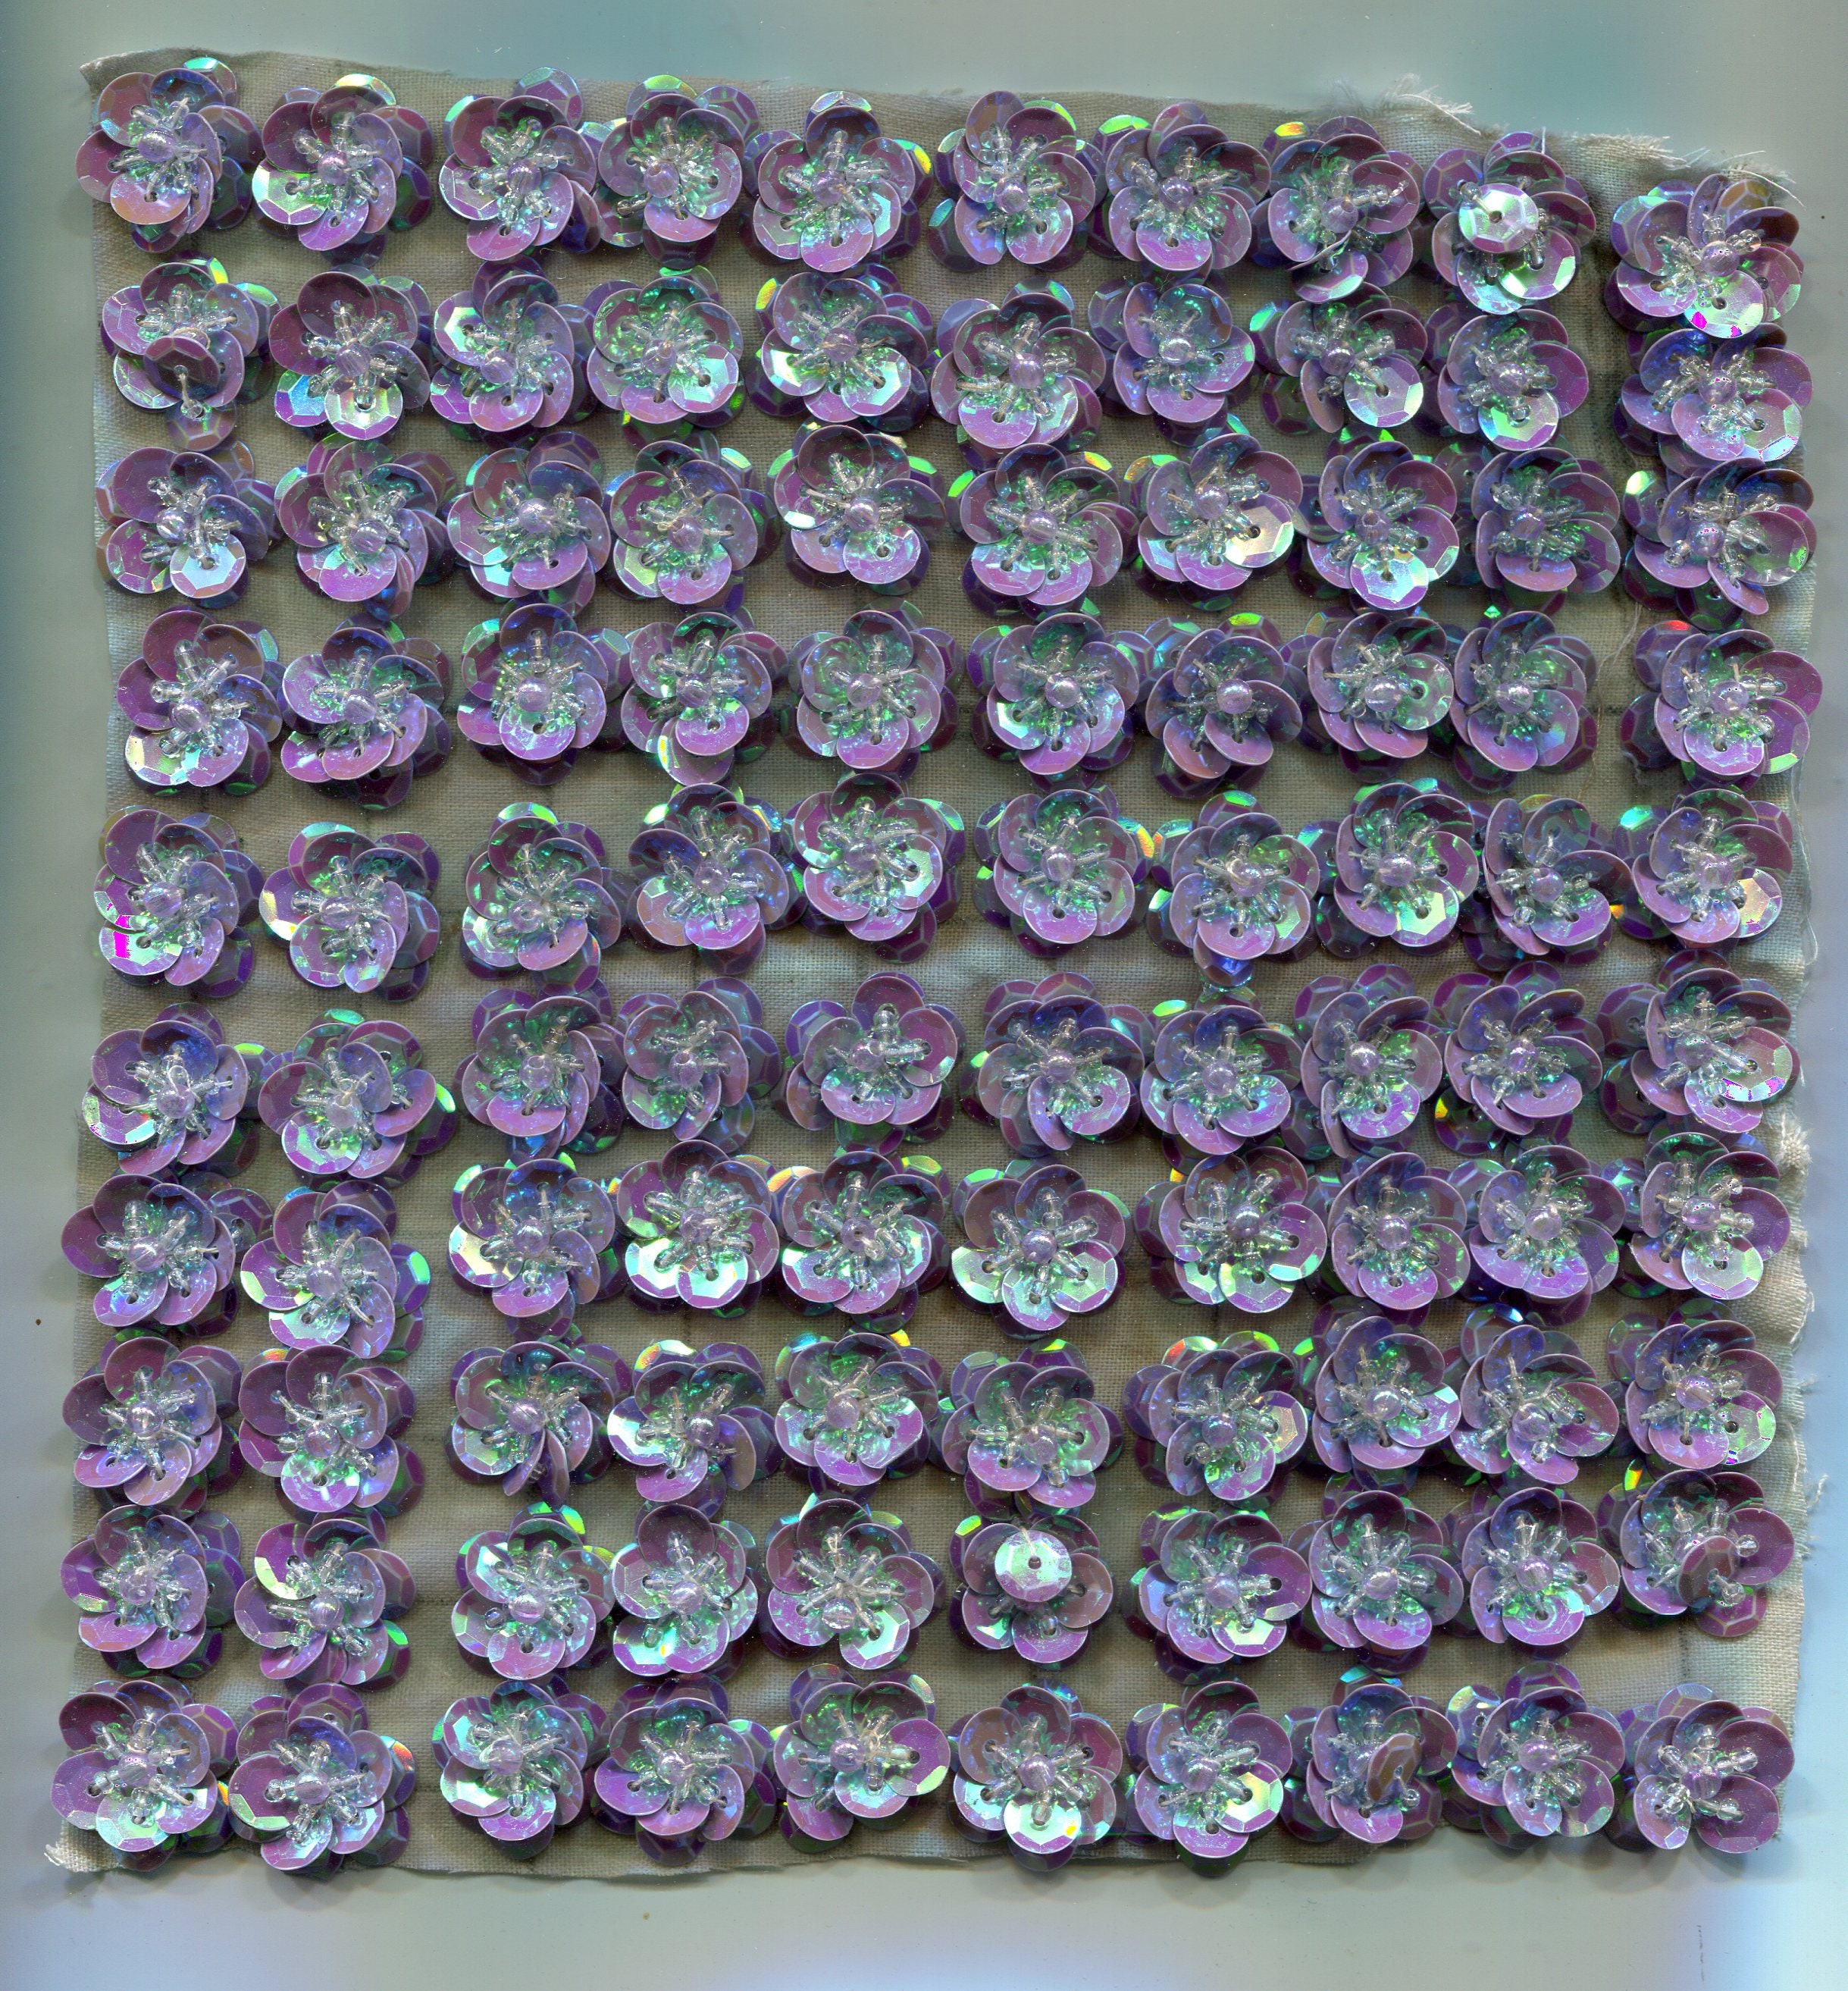 Lilac Sequin Center Fabric Flowers set of 2 3 5/8 Inches Diameter